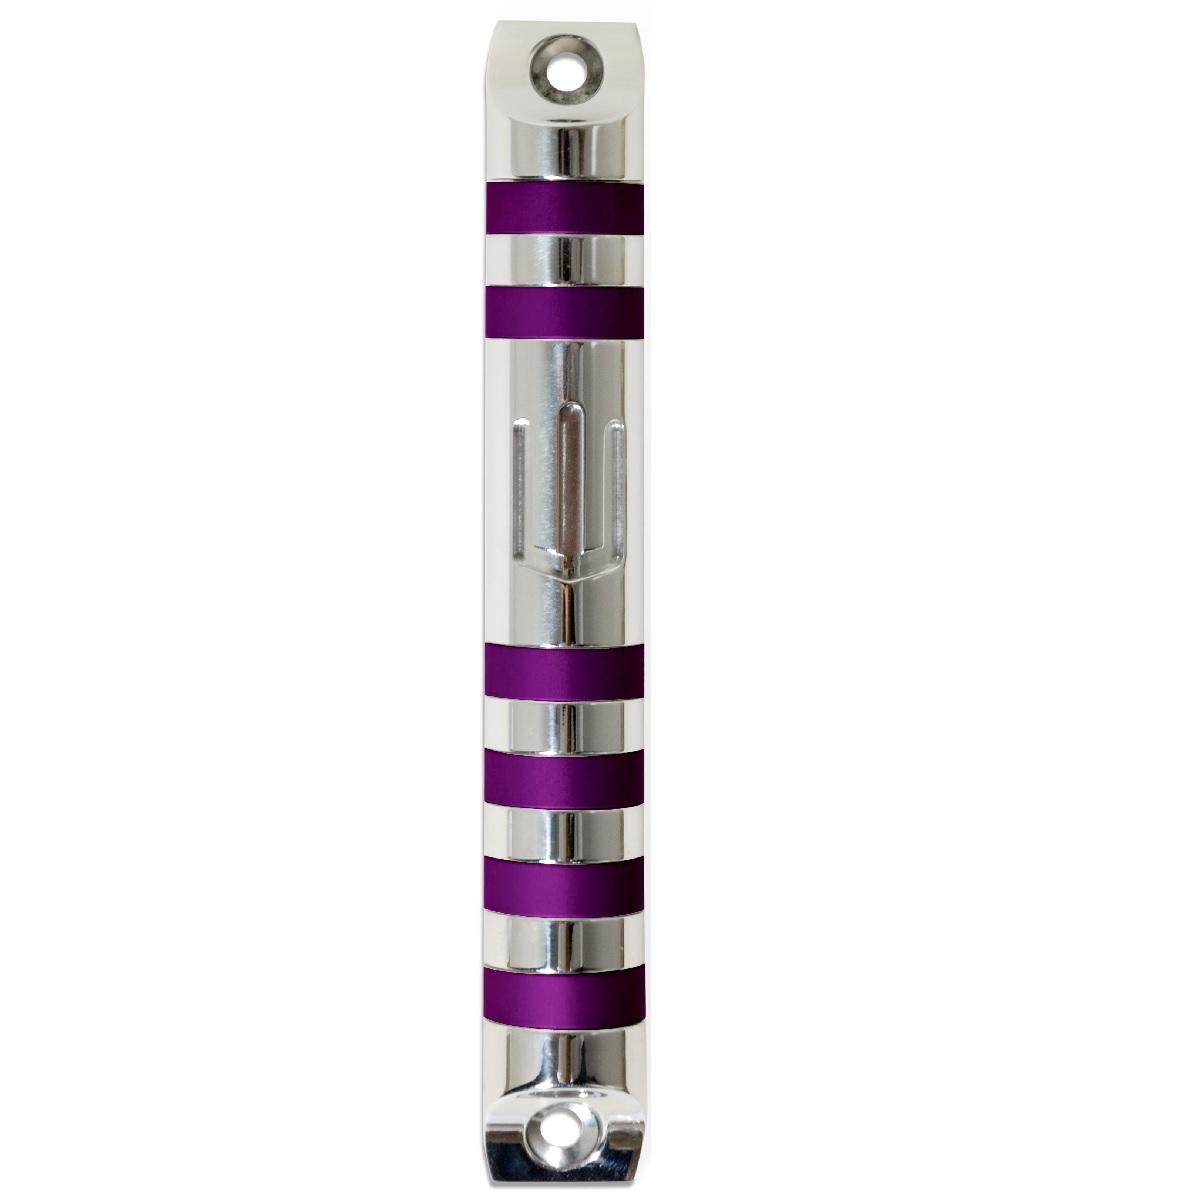 Nadav Art Anodized Aluminum Round Mezuzah Case with Colored Stripes (Choice of Colors) - 7